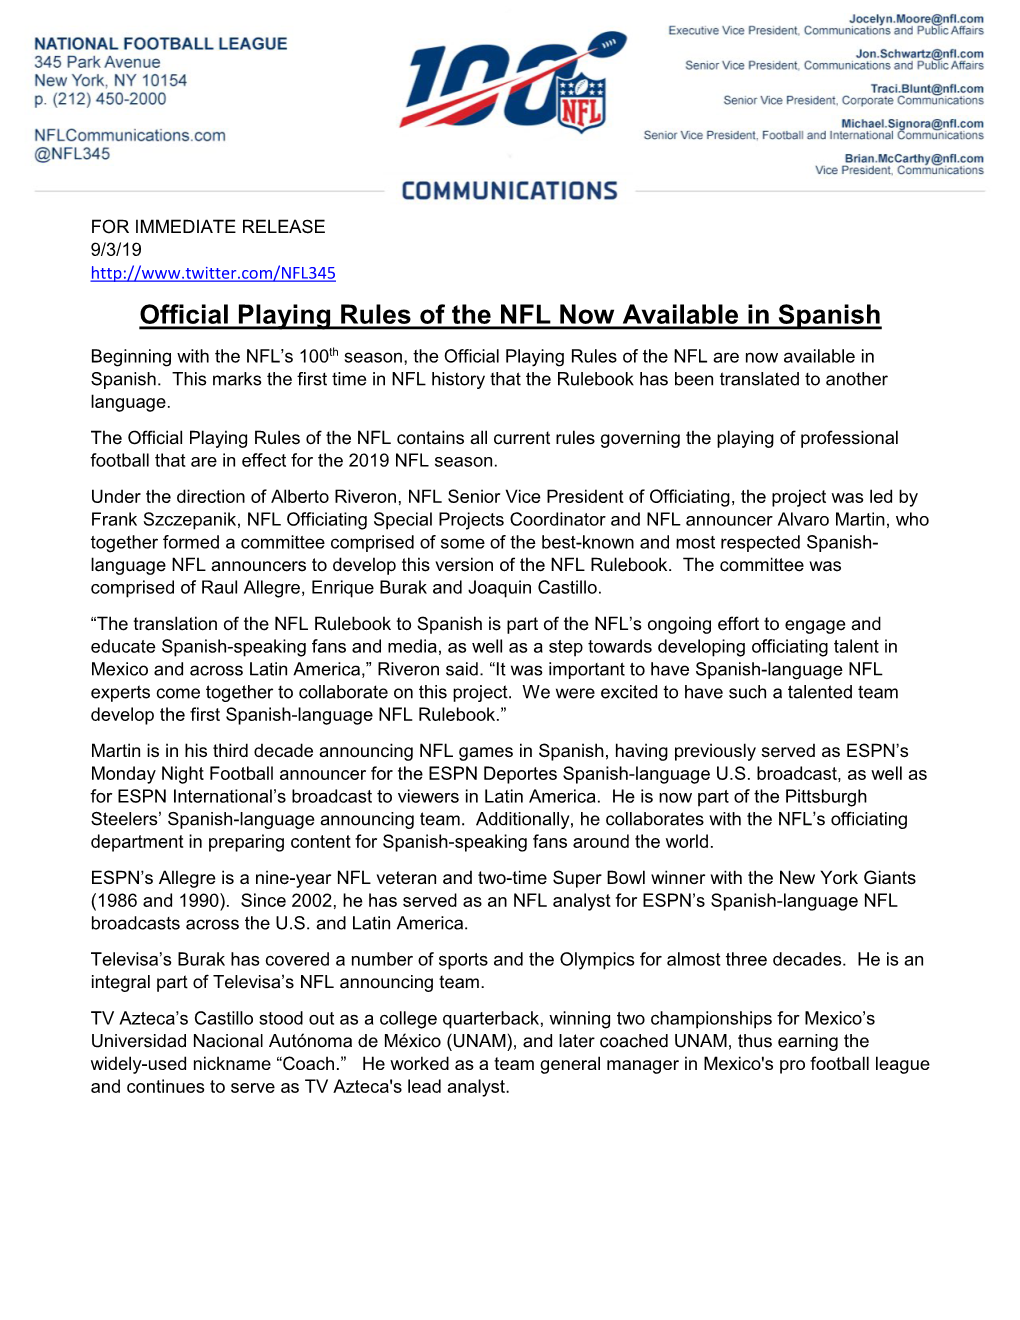 Official Playing Rules of the NFL Now Available in Spanish Beginning with the NFL’S 100Th Season, the Official Playing Rules of the NFL Are Now Available in Spanish